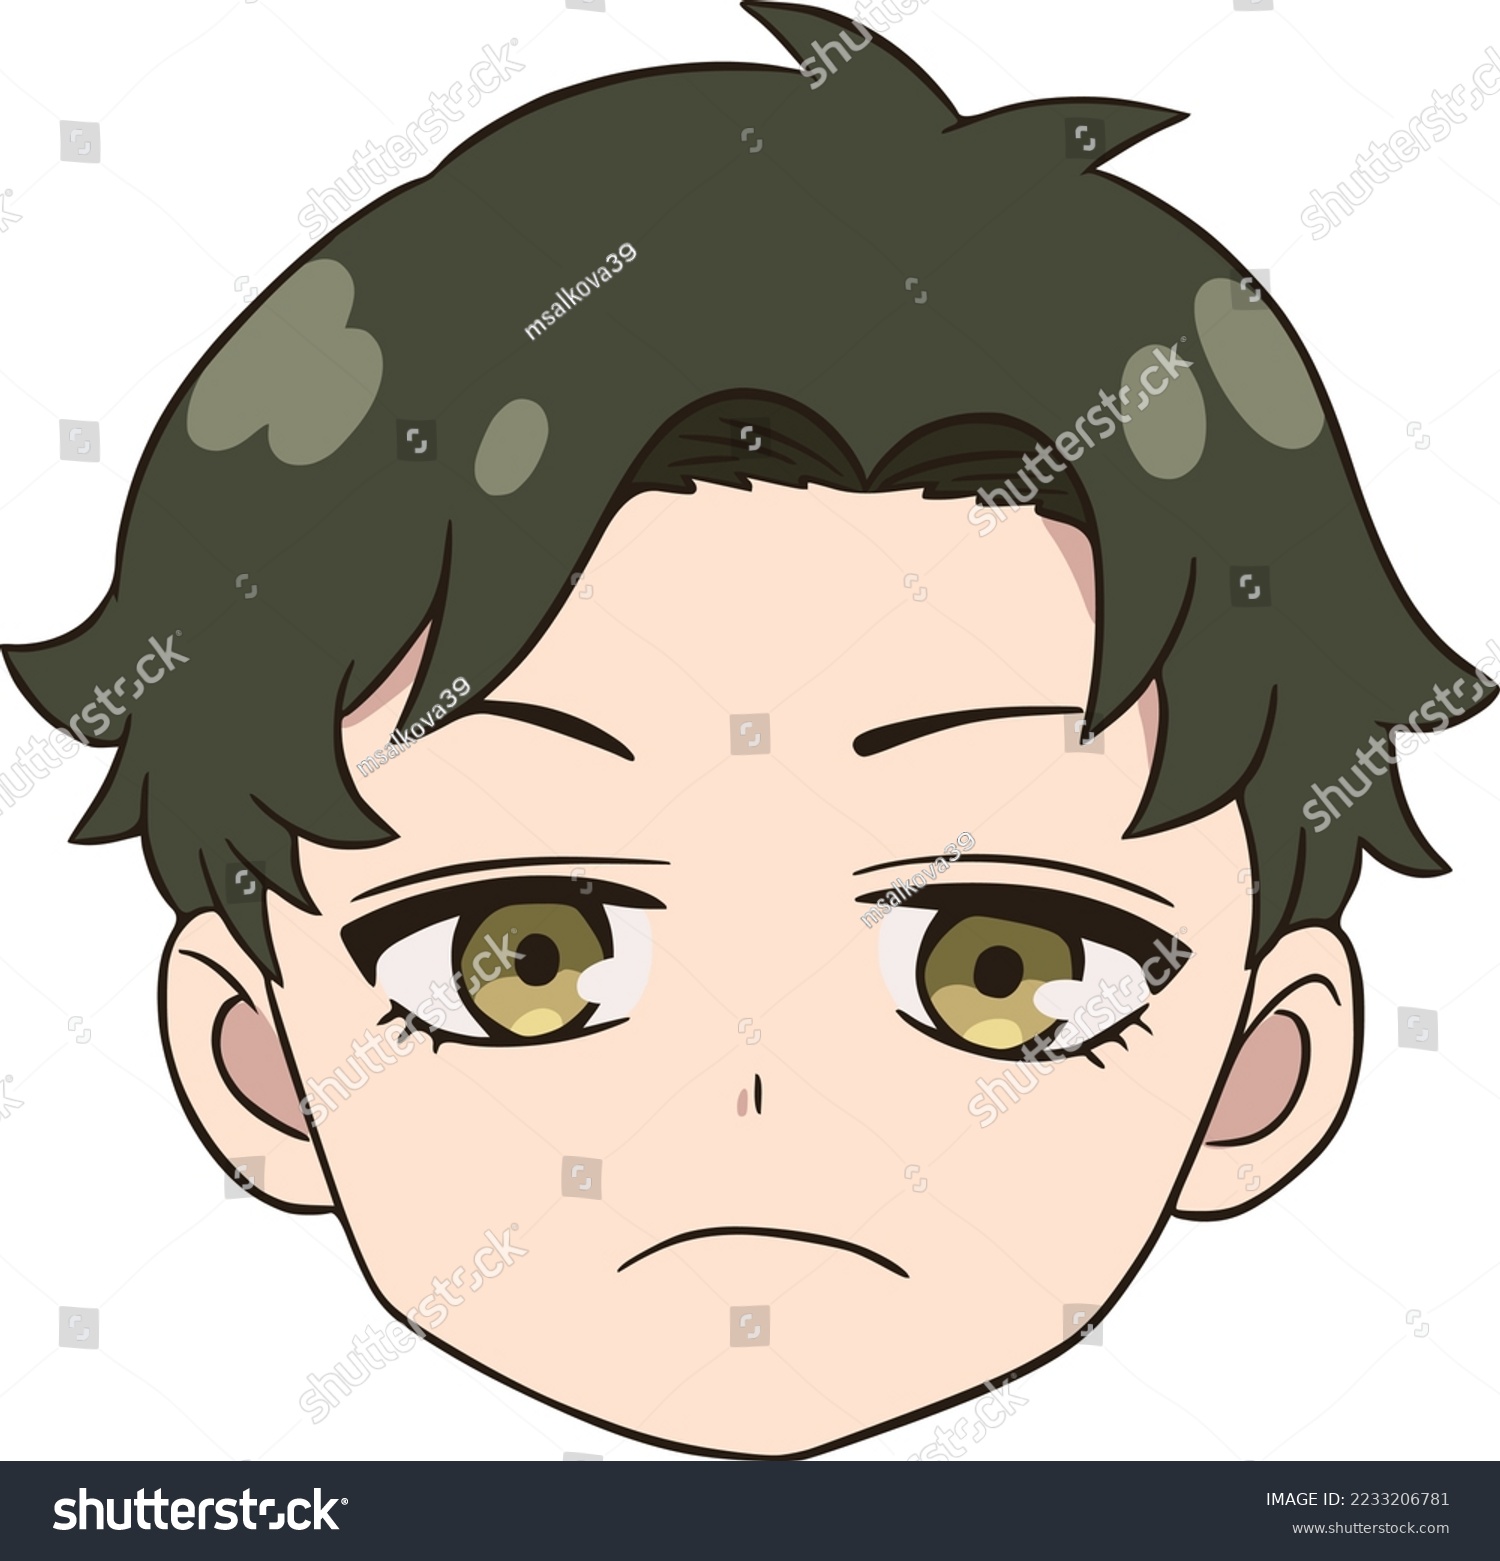 SVG of Boy with green hair and golden eyes, he looks straight ahead, frustrated, head only svg